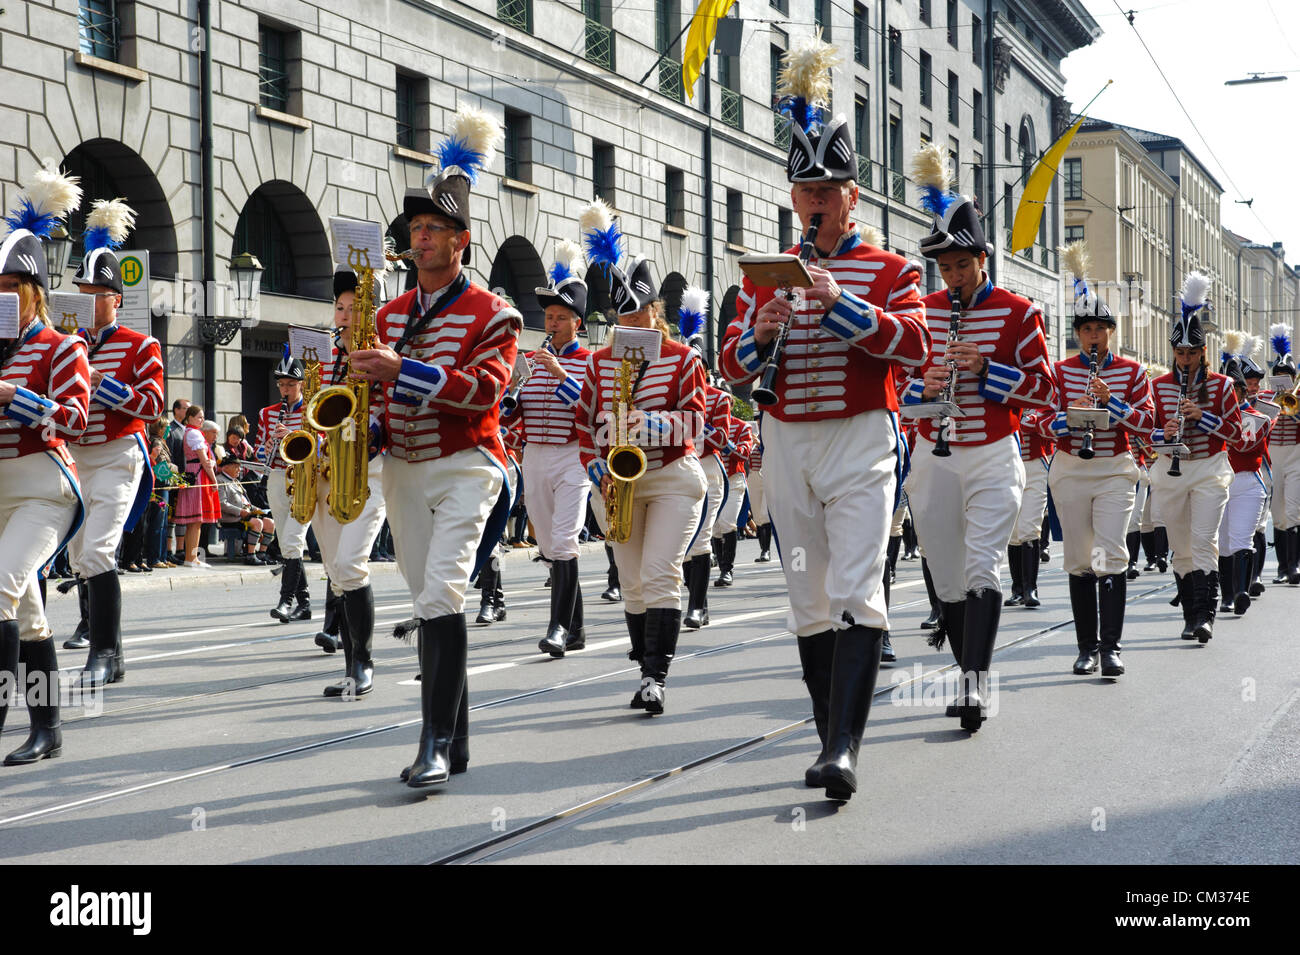 Munich, Germany. 23rd September, 2012. The opening parade of the world's biggest beer-festival, Oktoberfest, proceeds through the city of Munich, Germany. The music brass band of Germering, in historical costumes, was part of 8900 participants of this public parade. Stock Photo